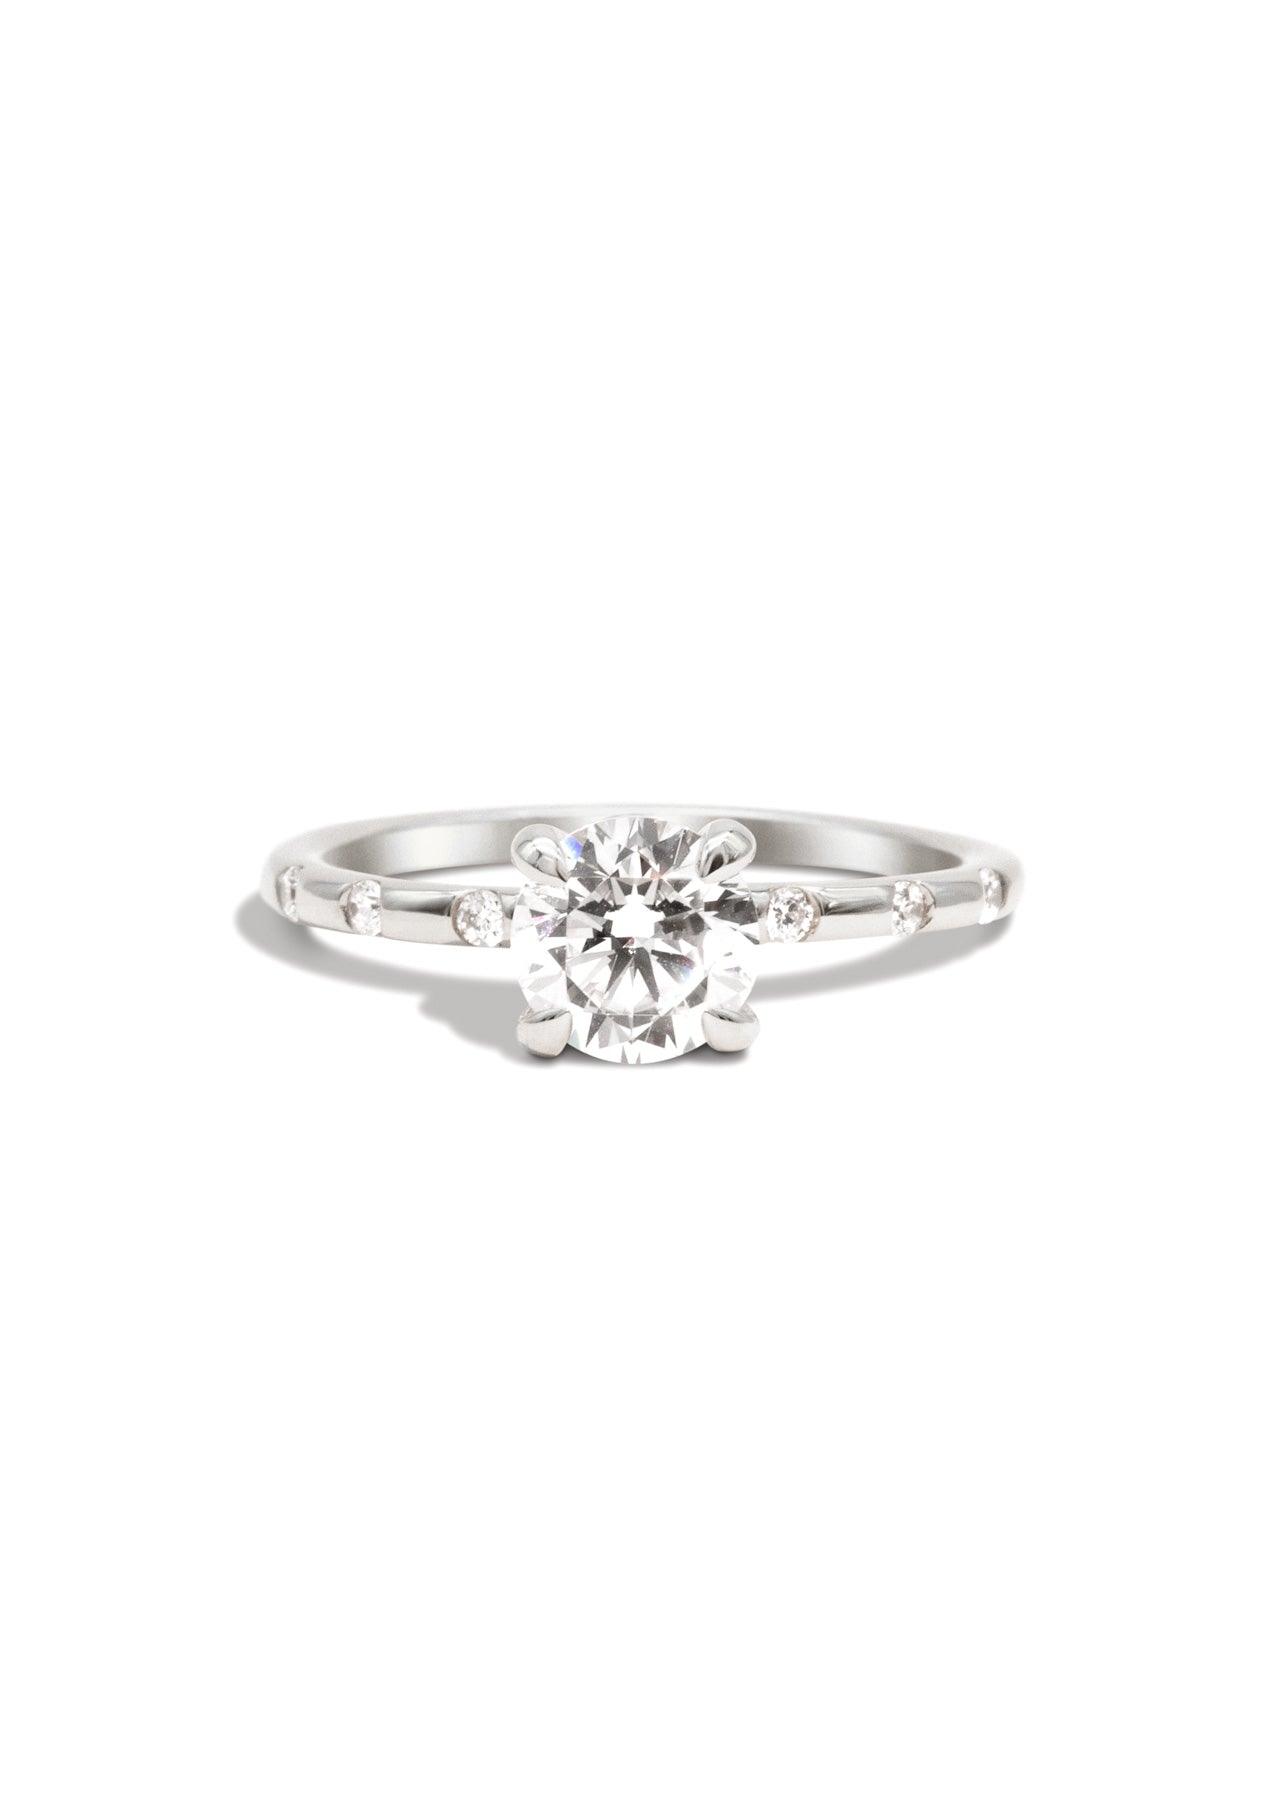 The Constance White Gold Cultured Diamond Ring